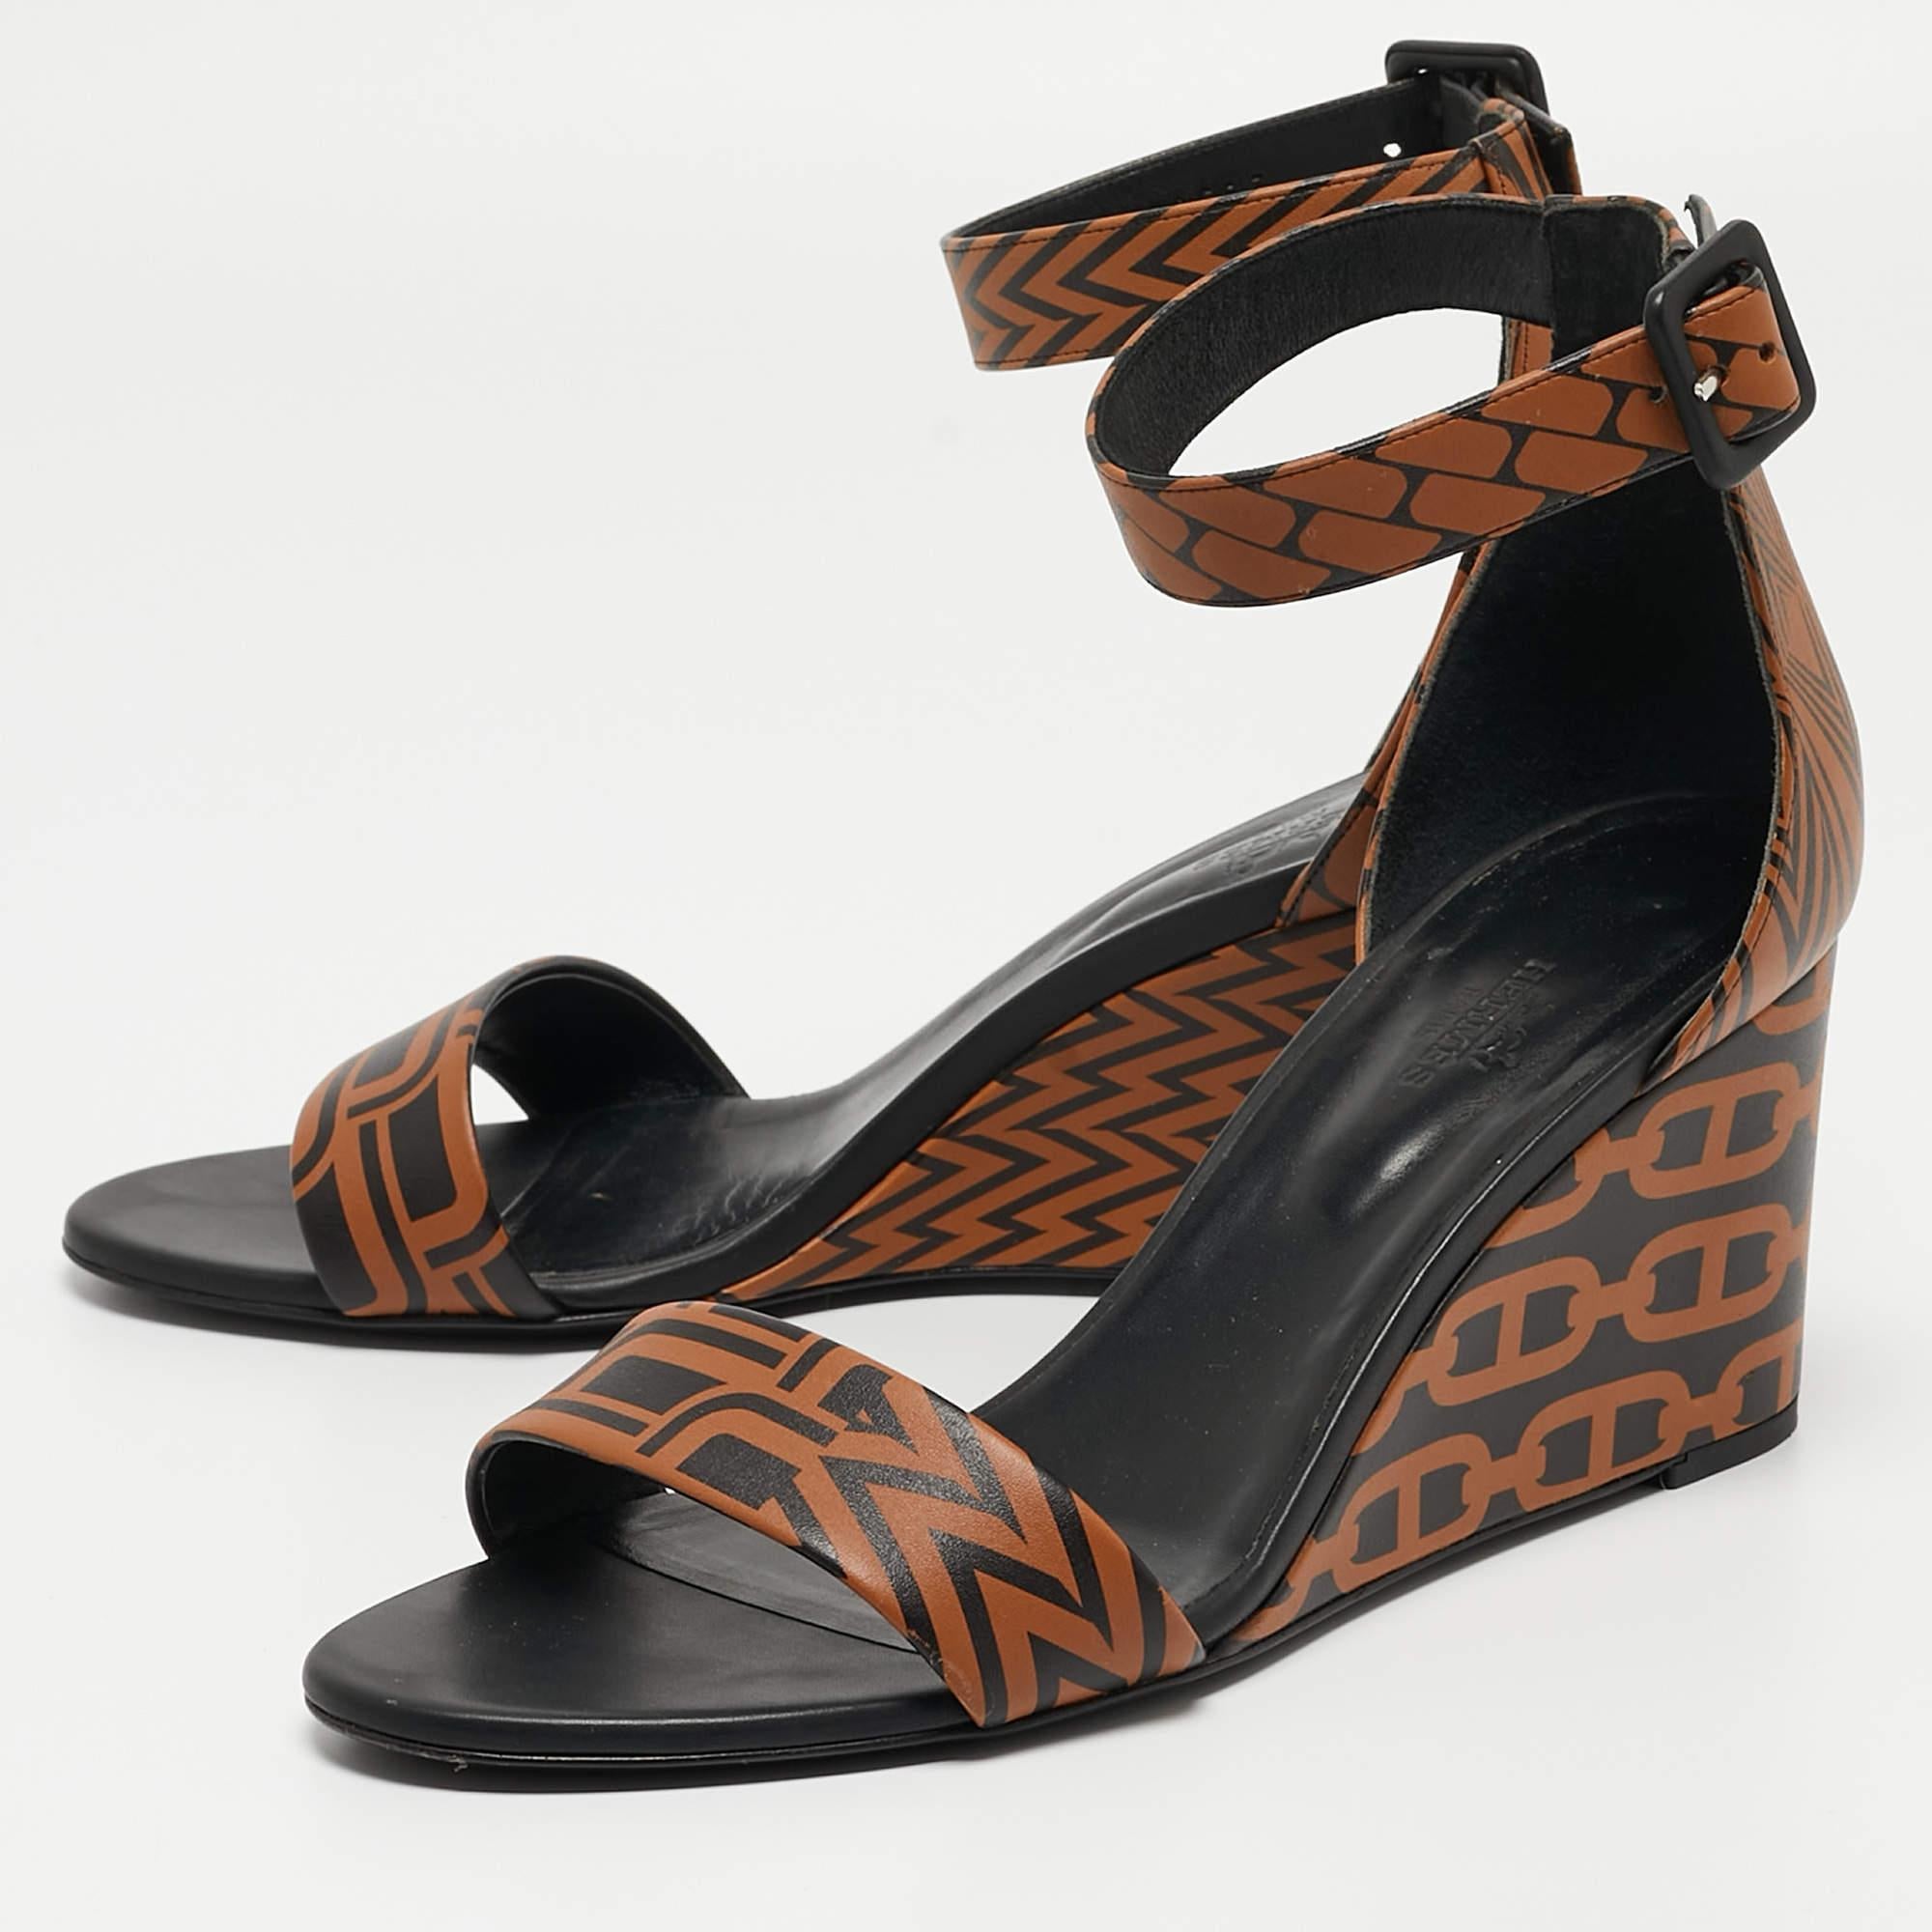 Make a statement with these Hermes wedge sandals for women. Impeccably crafted, these chic heels offer both fashion and comfort, elevating your look with each graceful step.

